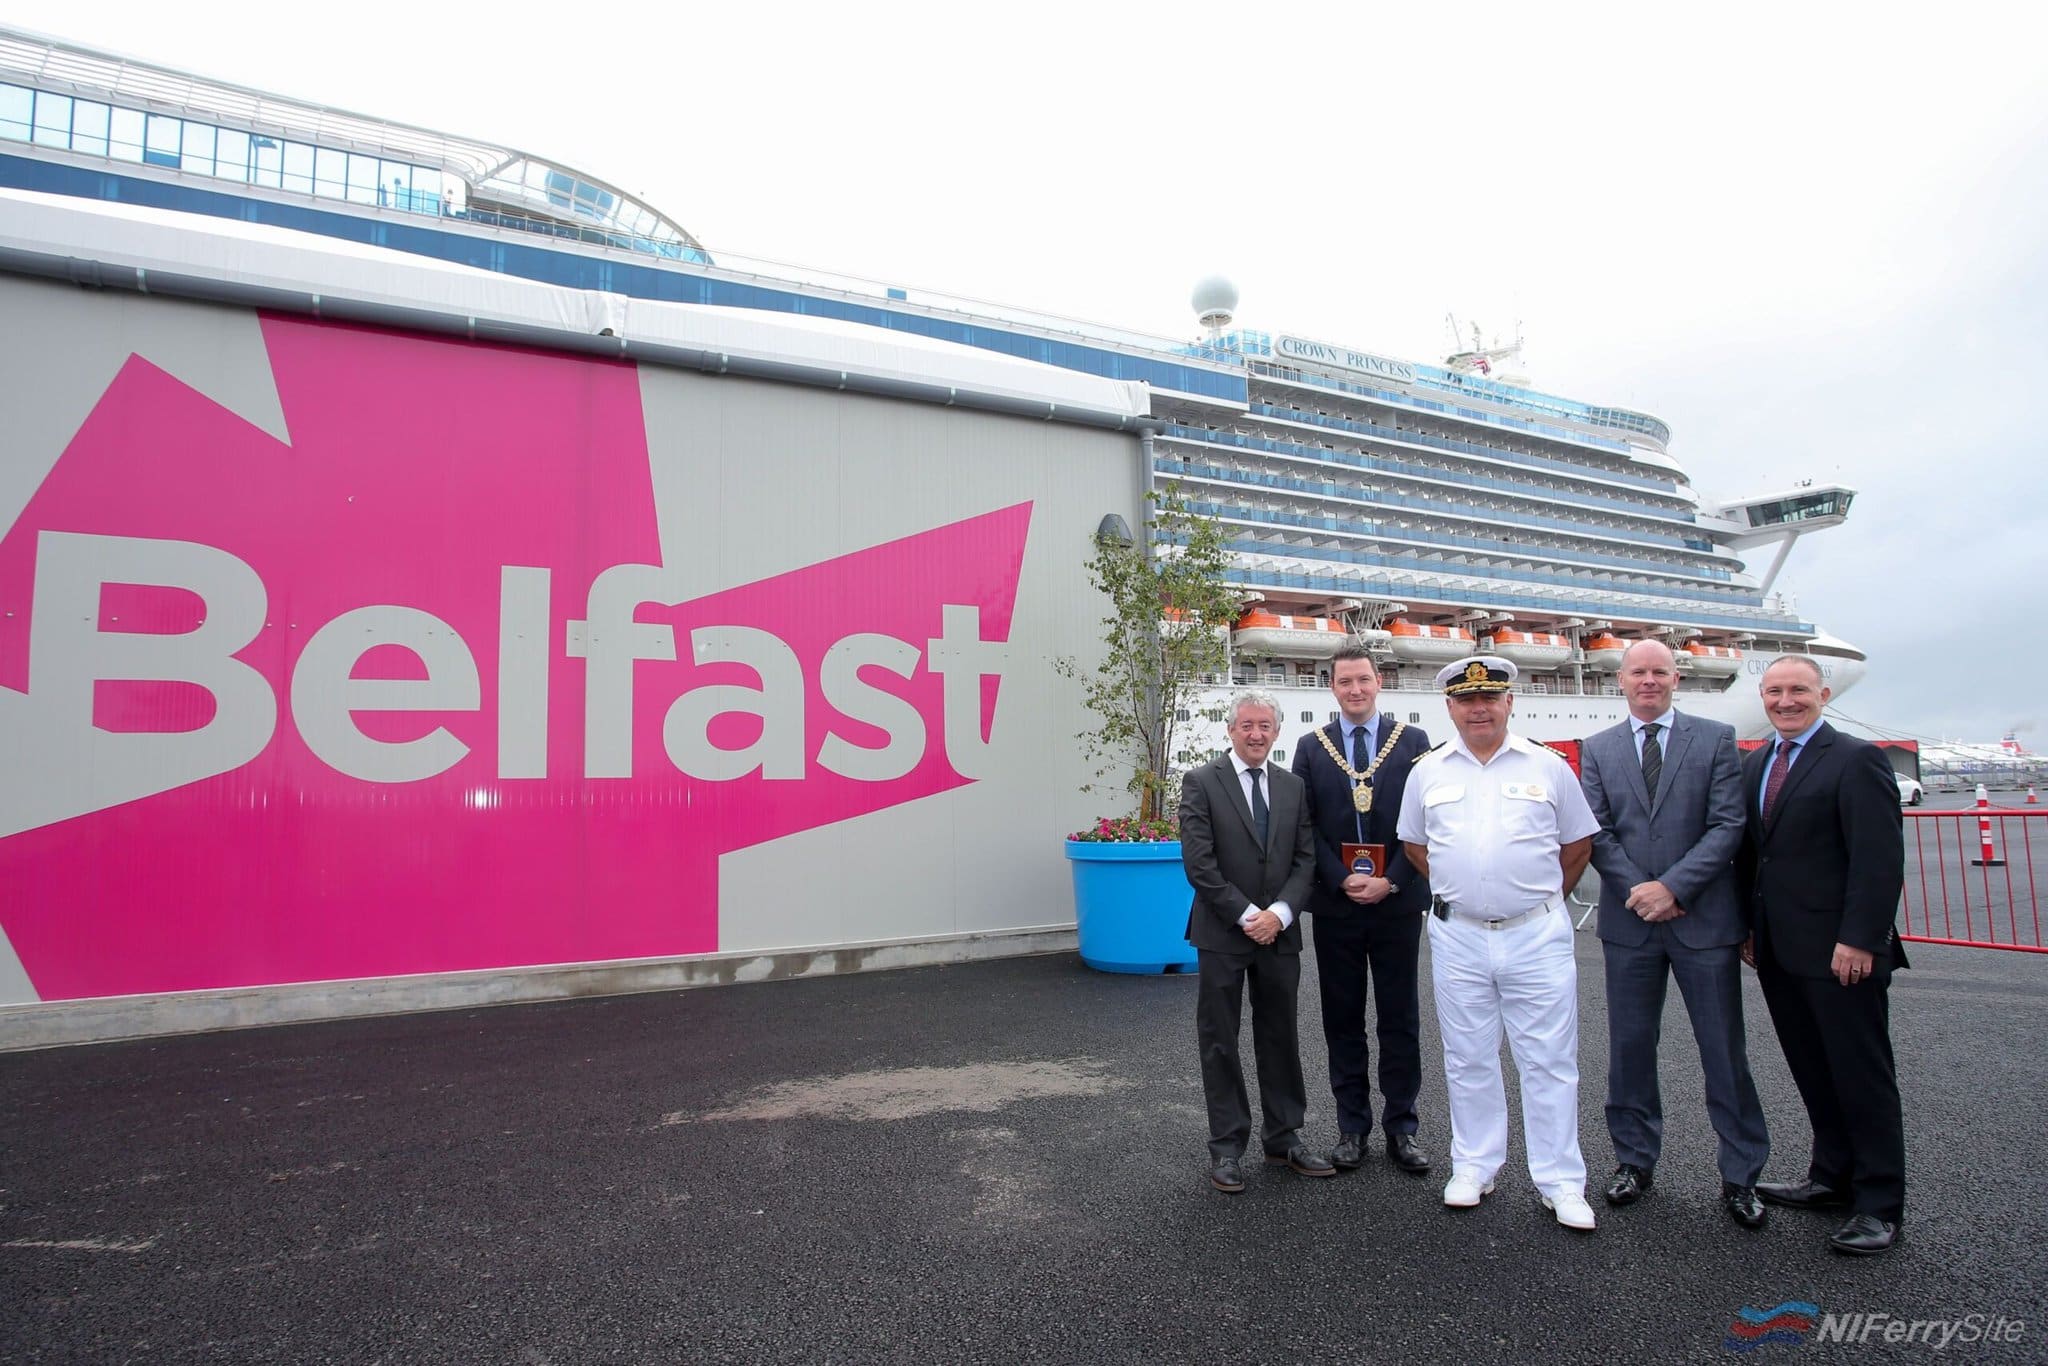 cruise ship stopping in belfast